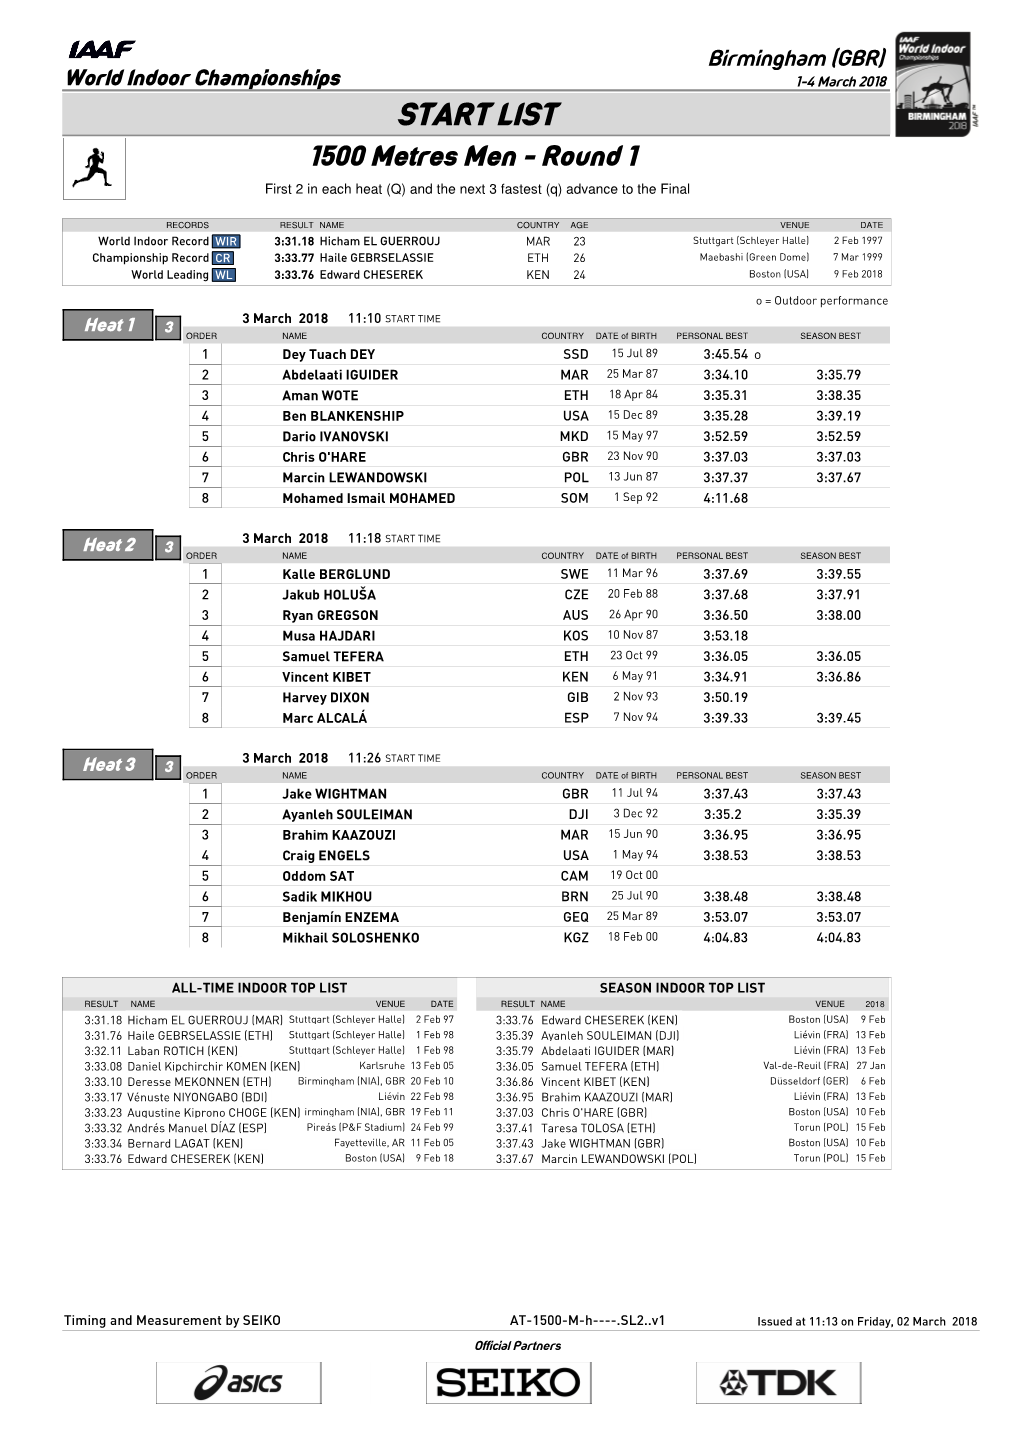 START LIST 1500 Metres Men - Round 1 First 2 in Each Heat (Q) and the Next 3 Fastest (Q) Advance to the Final